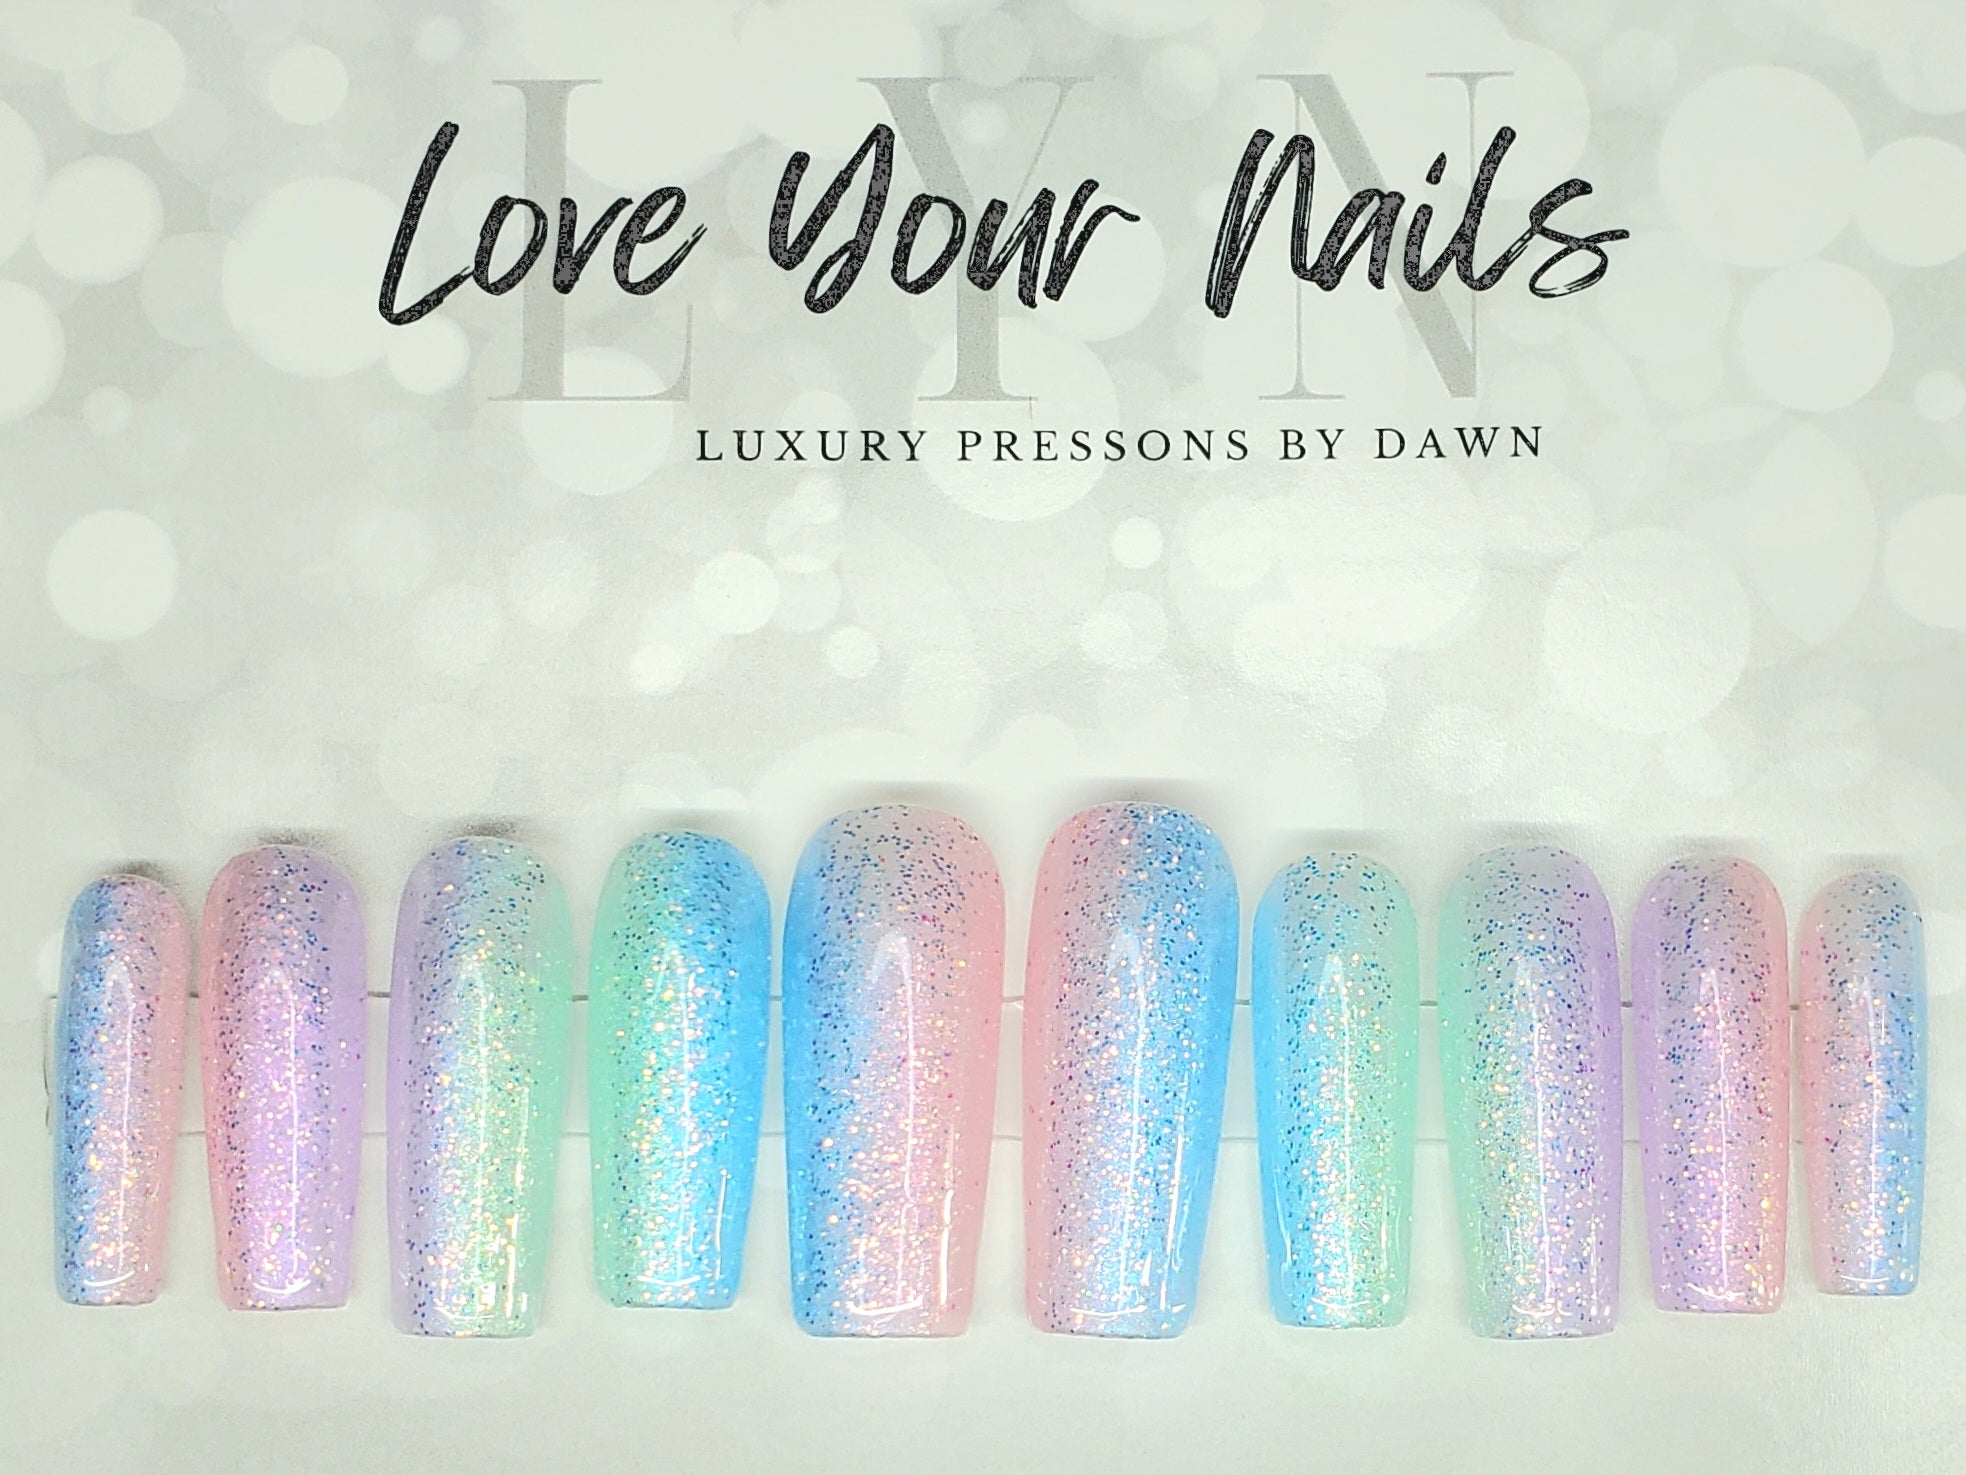 Your nails are a way to speak your style without having to say a word..! 𝗟𝗢𝗩𝗘  𝗬𝗢𝗨𝗥 𝗡𝗔𝗜𝗟𝗦 ❤ - The best Nail … | Nail art studio, Nail art, Cool  nail art